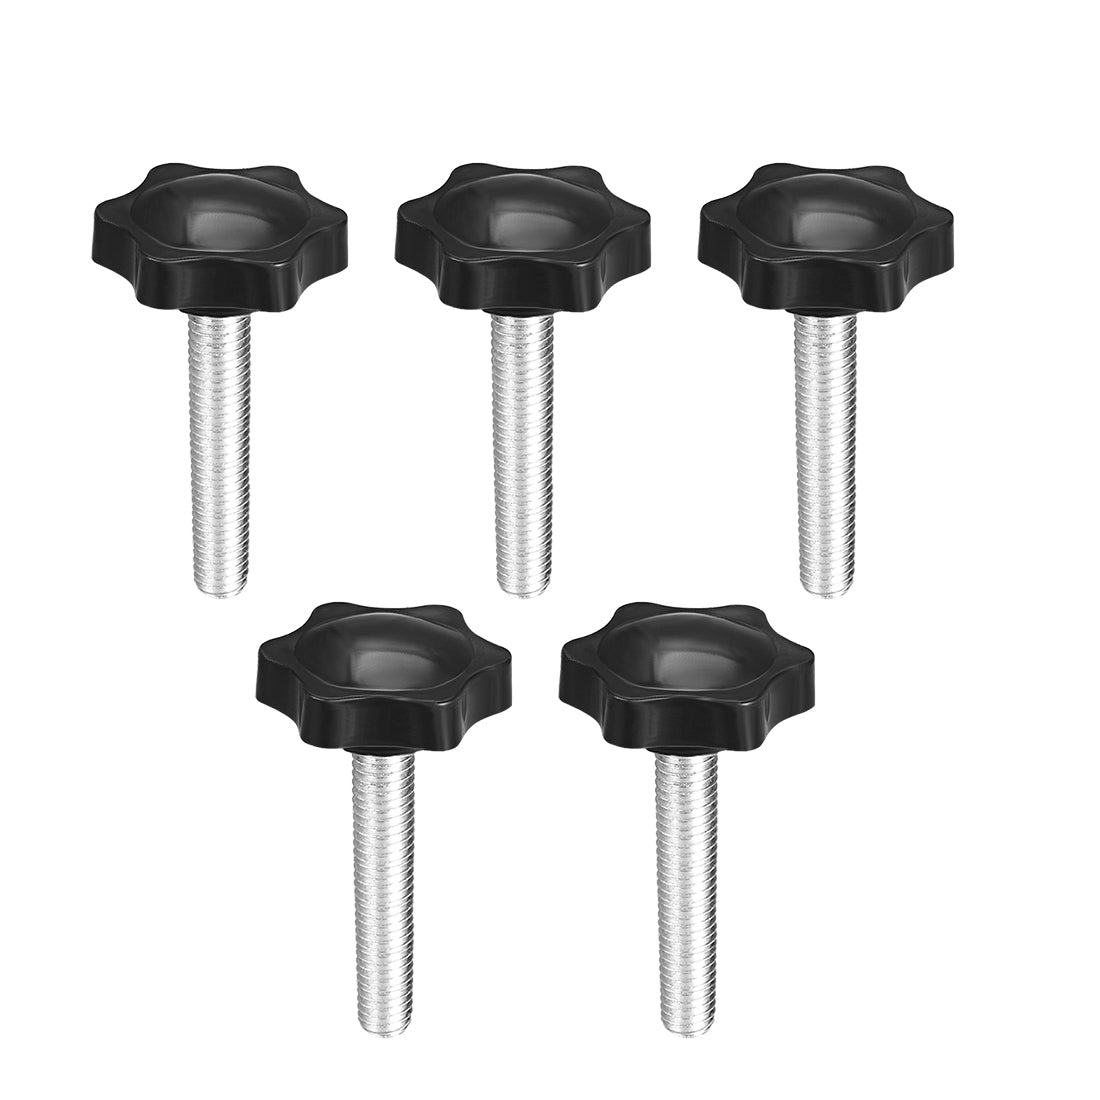 uxcell Uxcell Clamping Screw Knob Dia Plum Hex Shaped Grips Star Knob Male Thread 5pcs